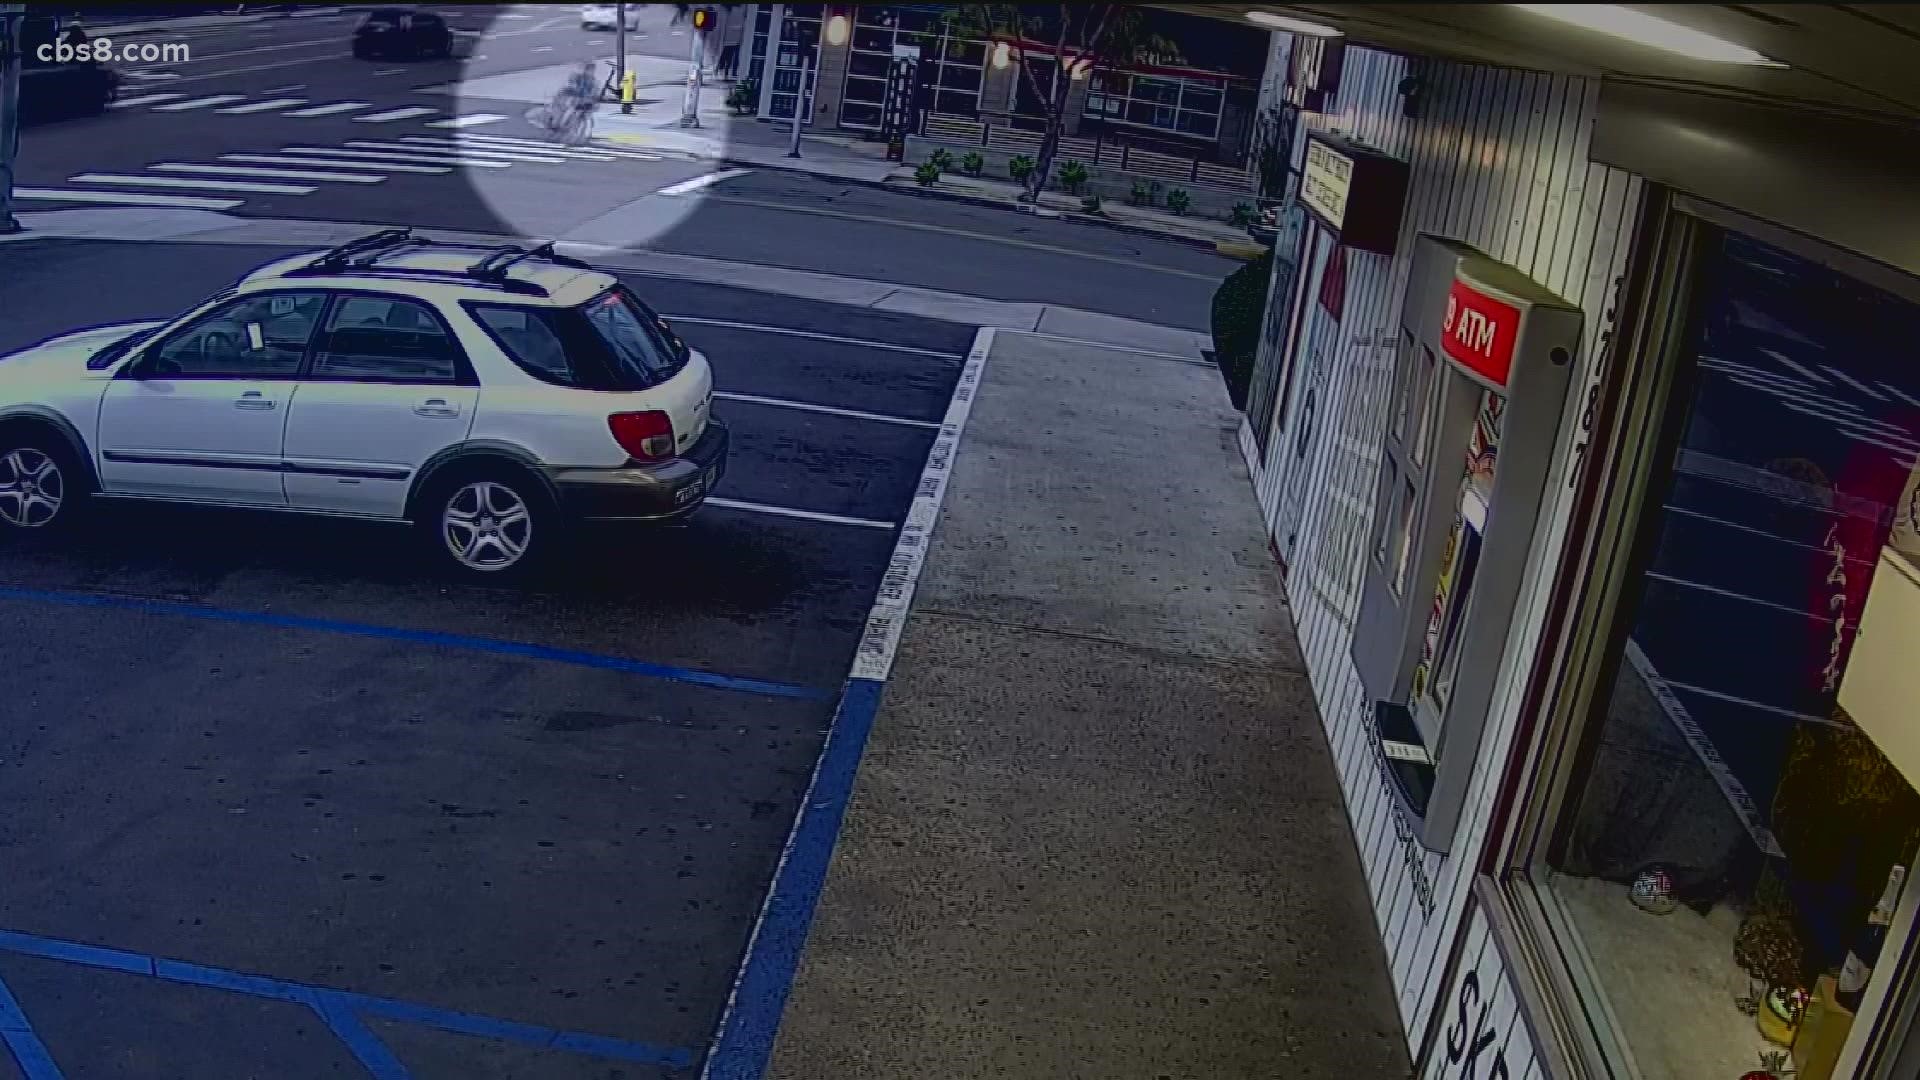 SDPD said driver in Pacific Beach may face felony assault with a deadly weapon charges.